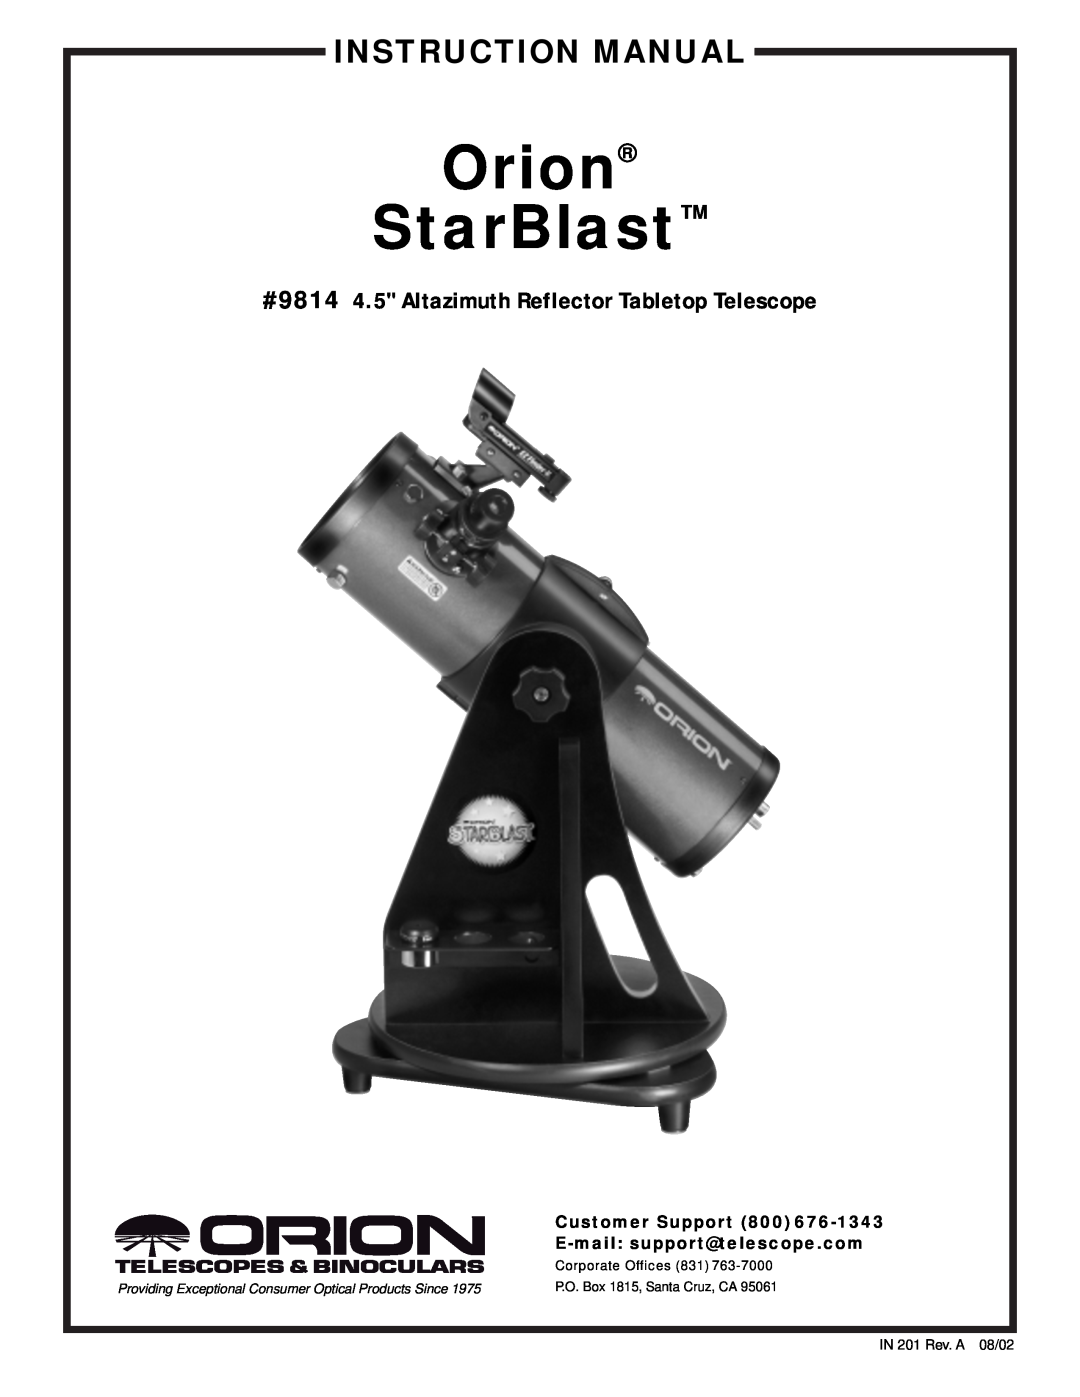 Orion instruction manual #9814 4.5 Altazimuth Reflector Tabletop Telescope, Orion StarBlast, Customer Support 